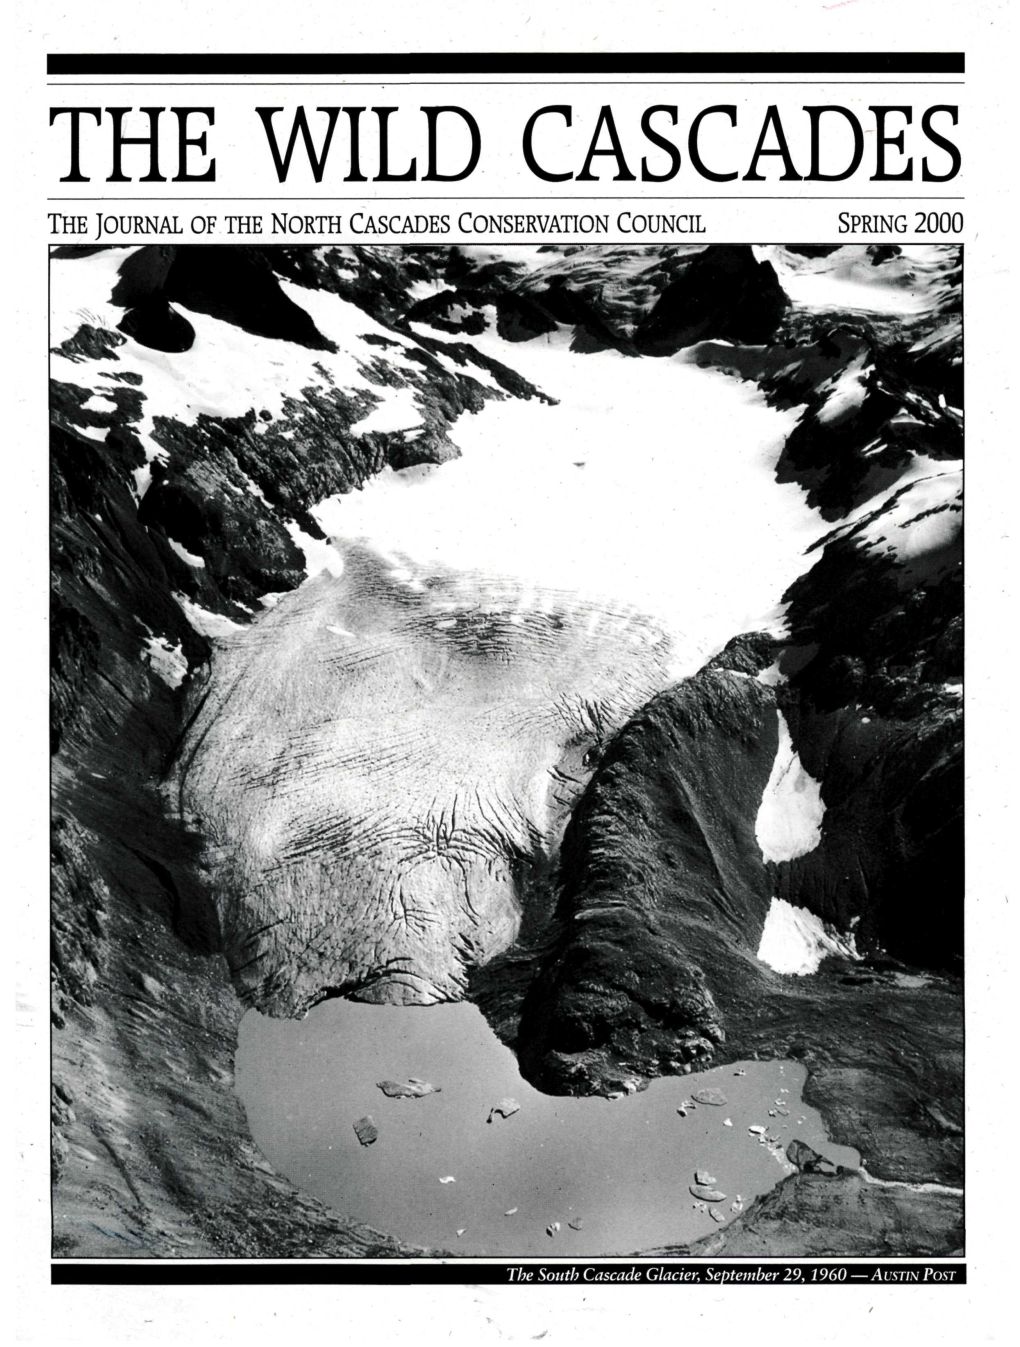 The Wild Cascades the Journal of the North Cascades Conservation Council Spring 2000